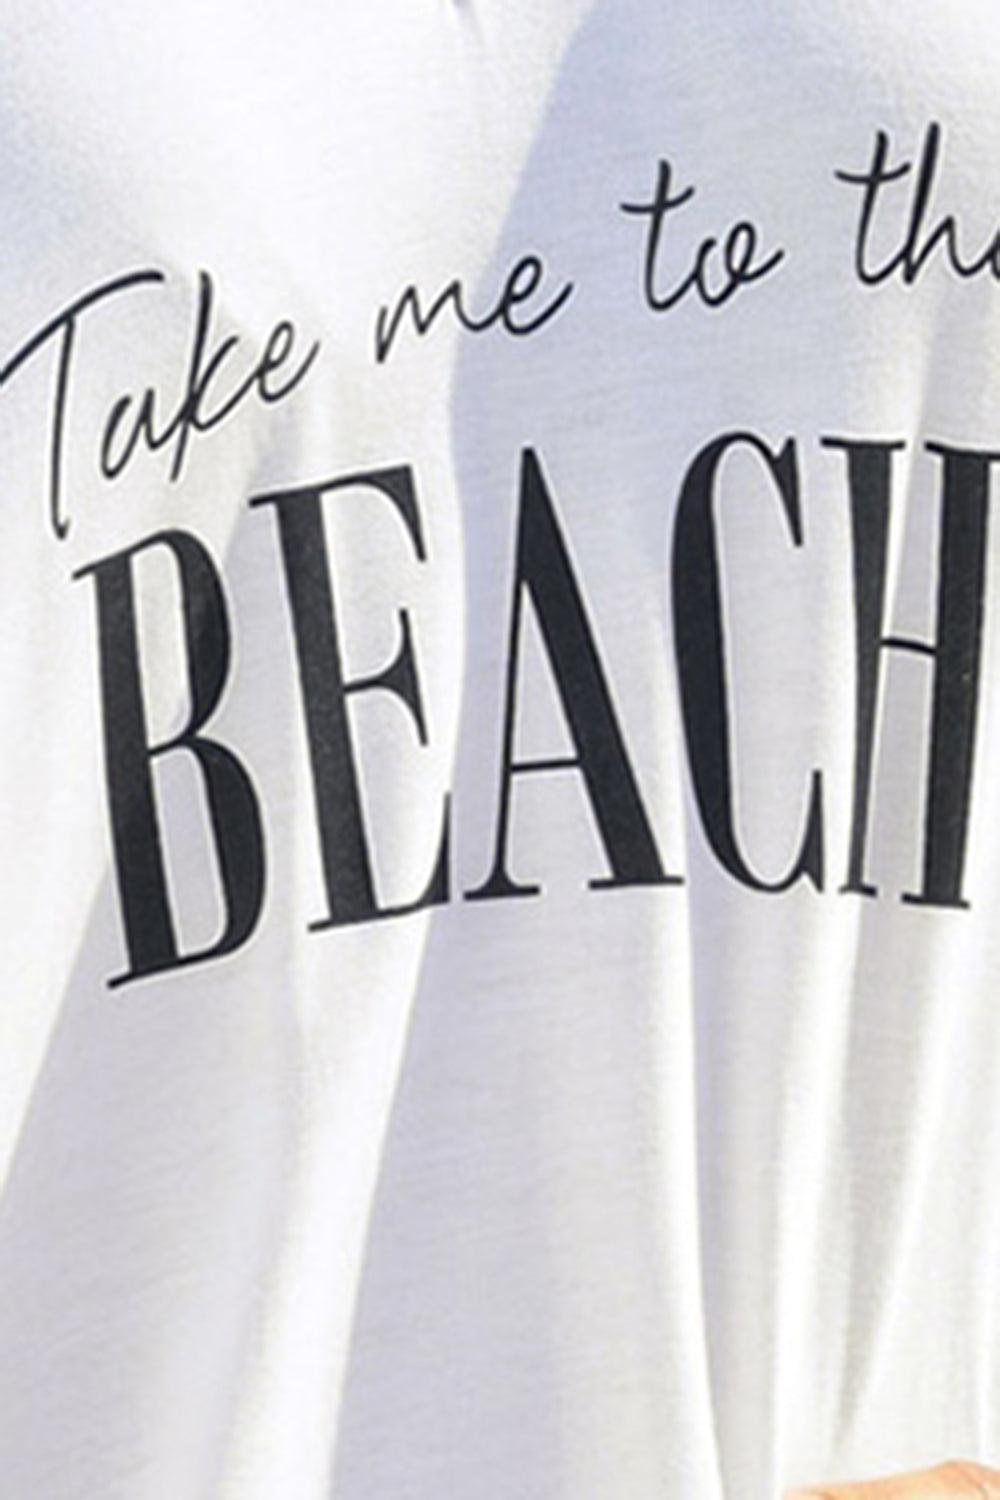 a person wearing a white shirt that says take me to the beach